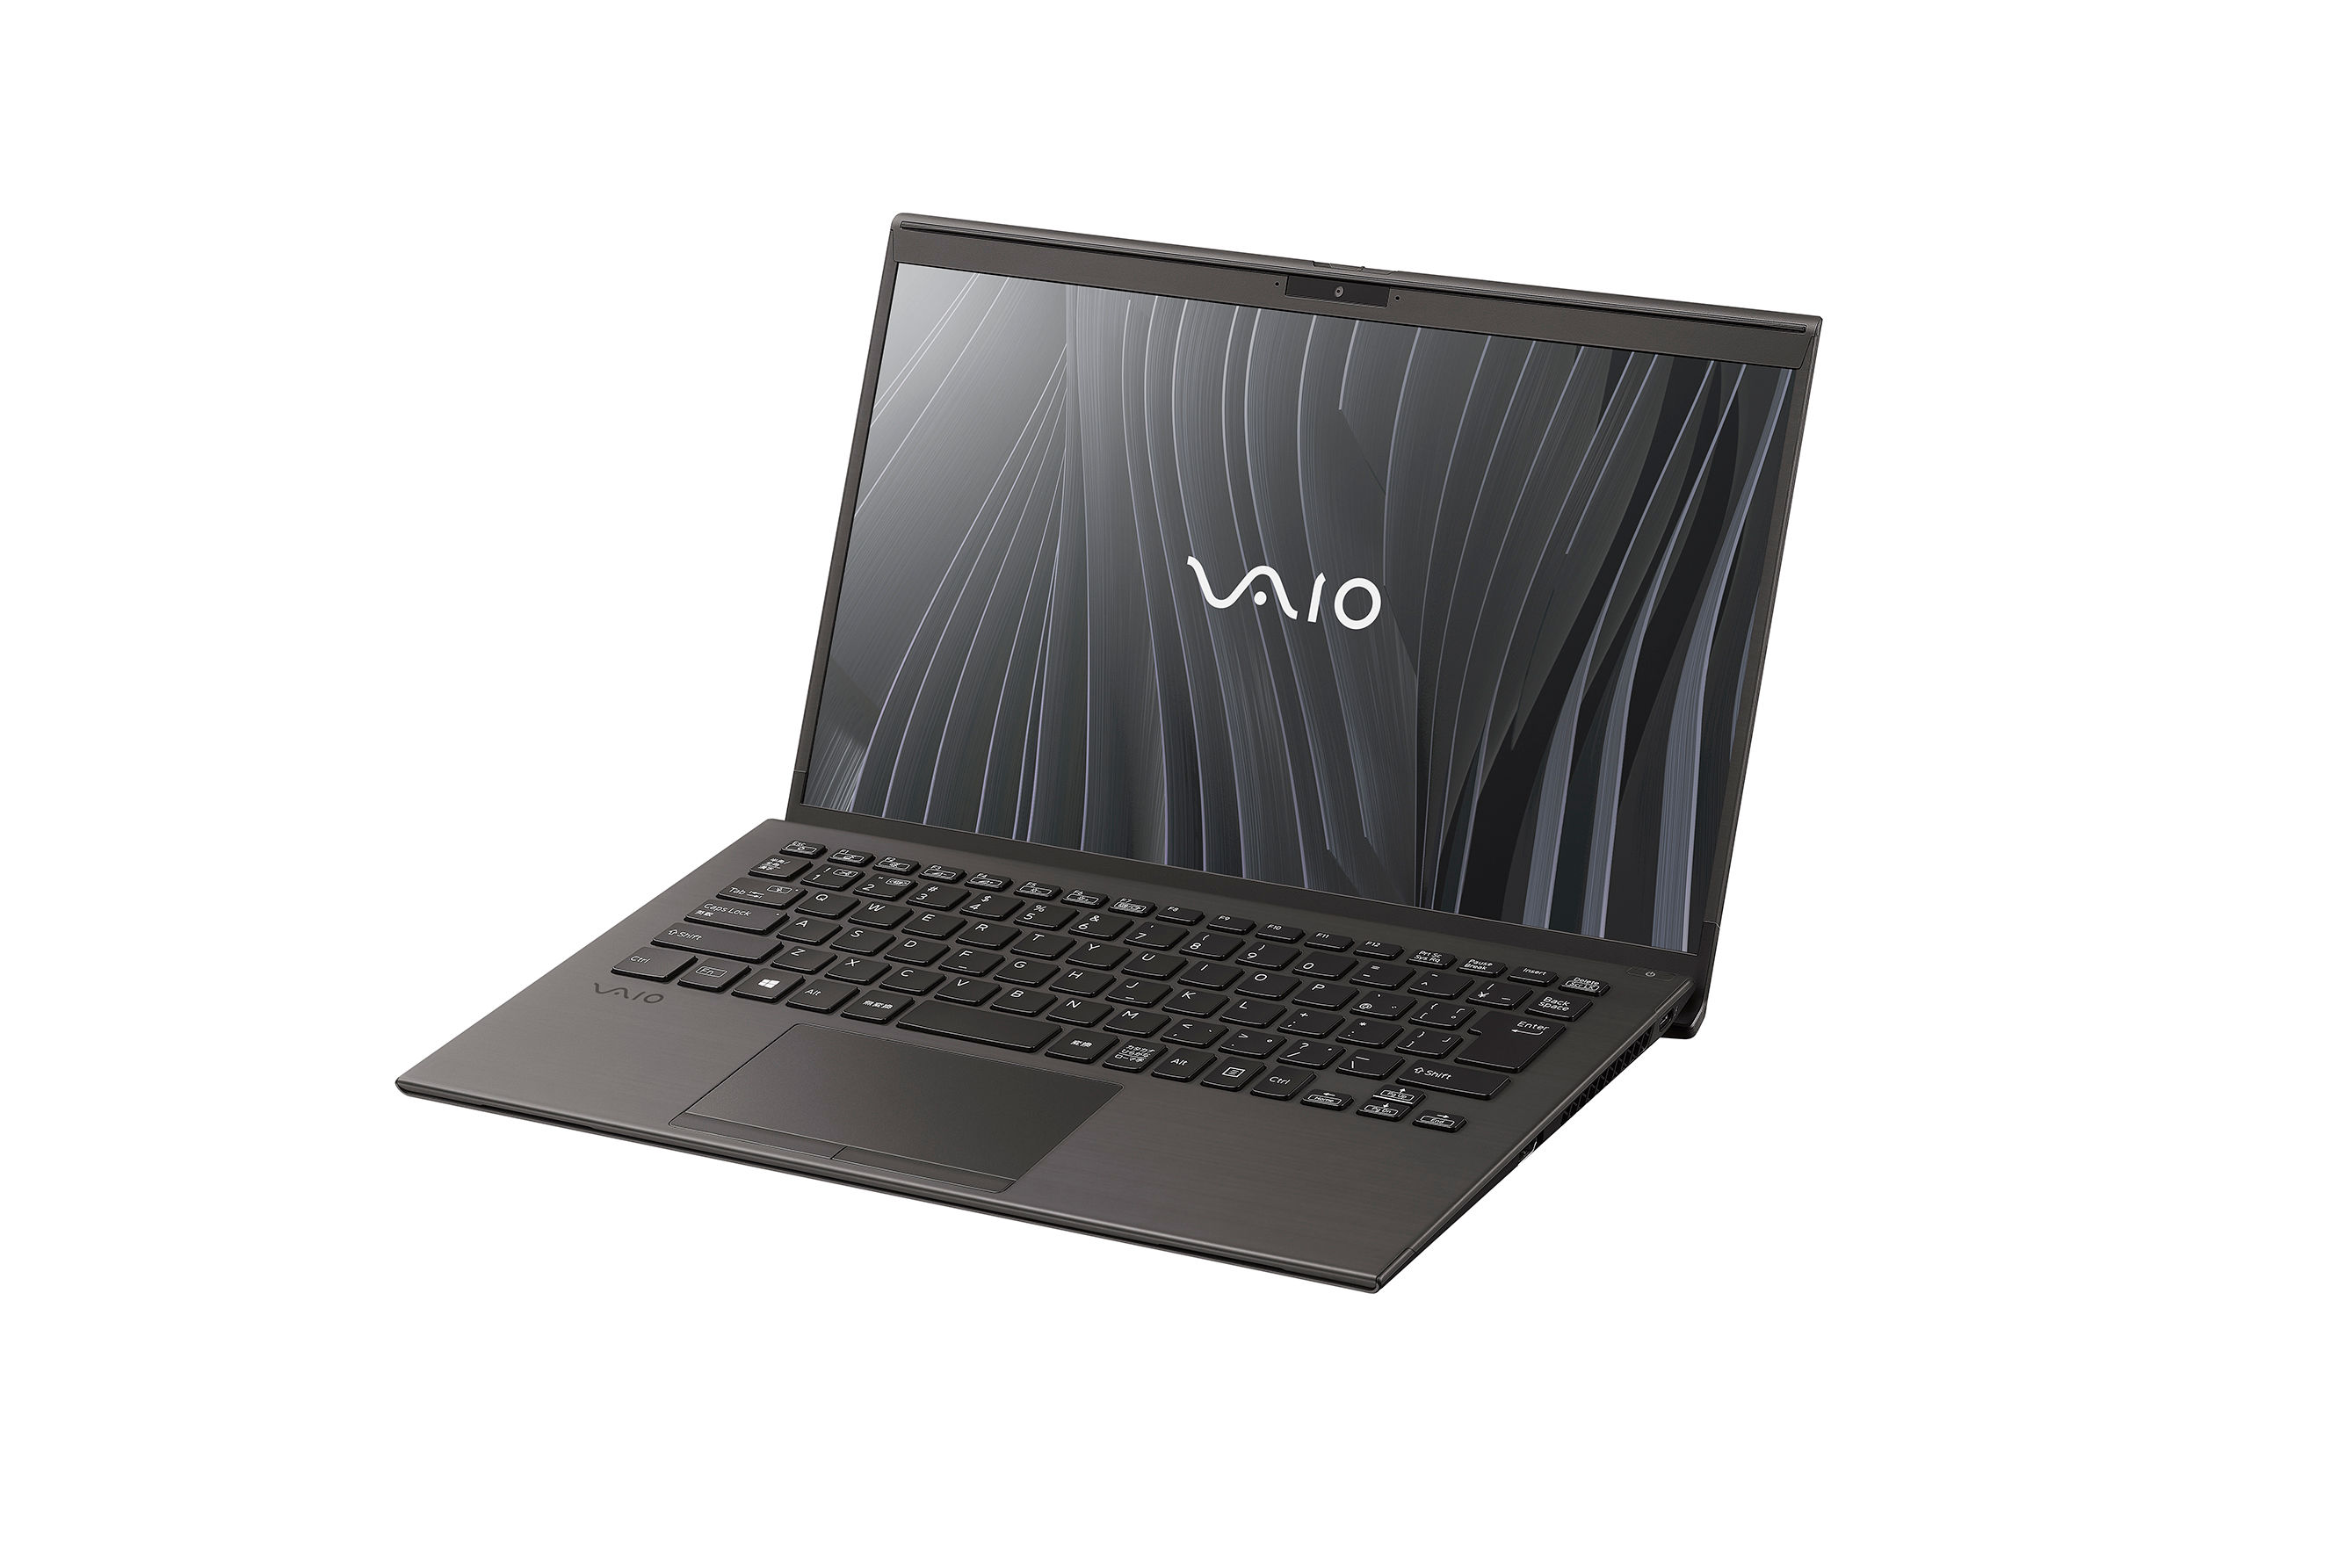 vaio-z-2021-launched-with-11th-gen-intel-tiger-lake-cpus-4k-screen